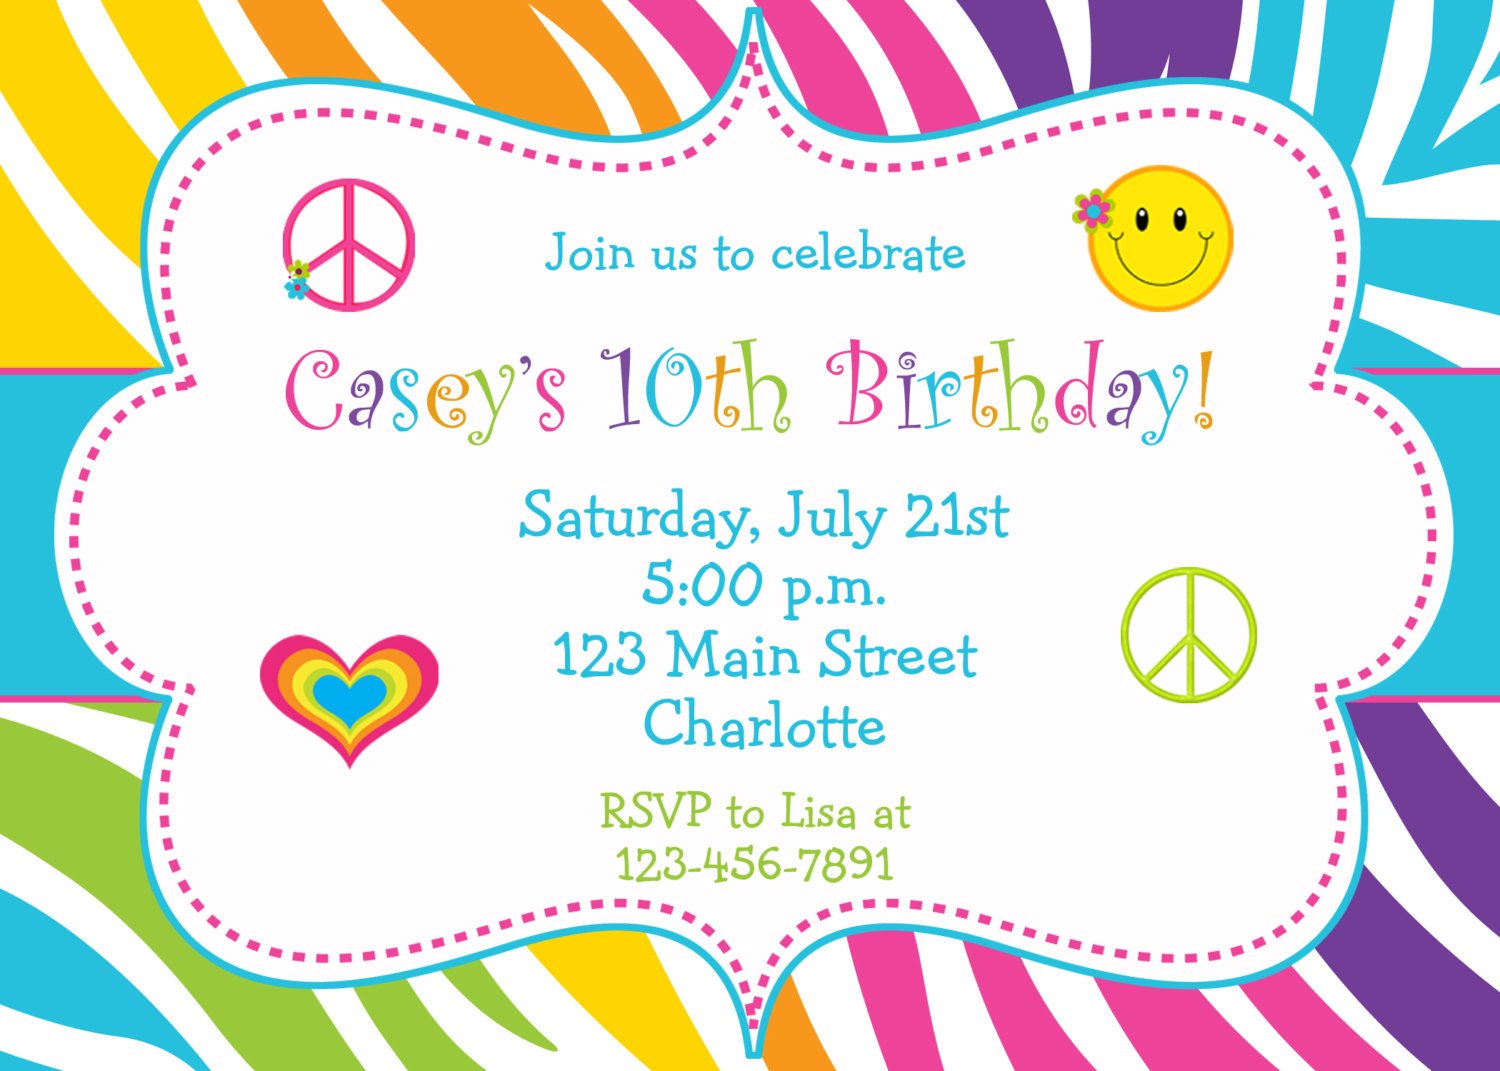 Free Party Invitations To Print At Home 9